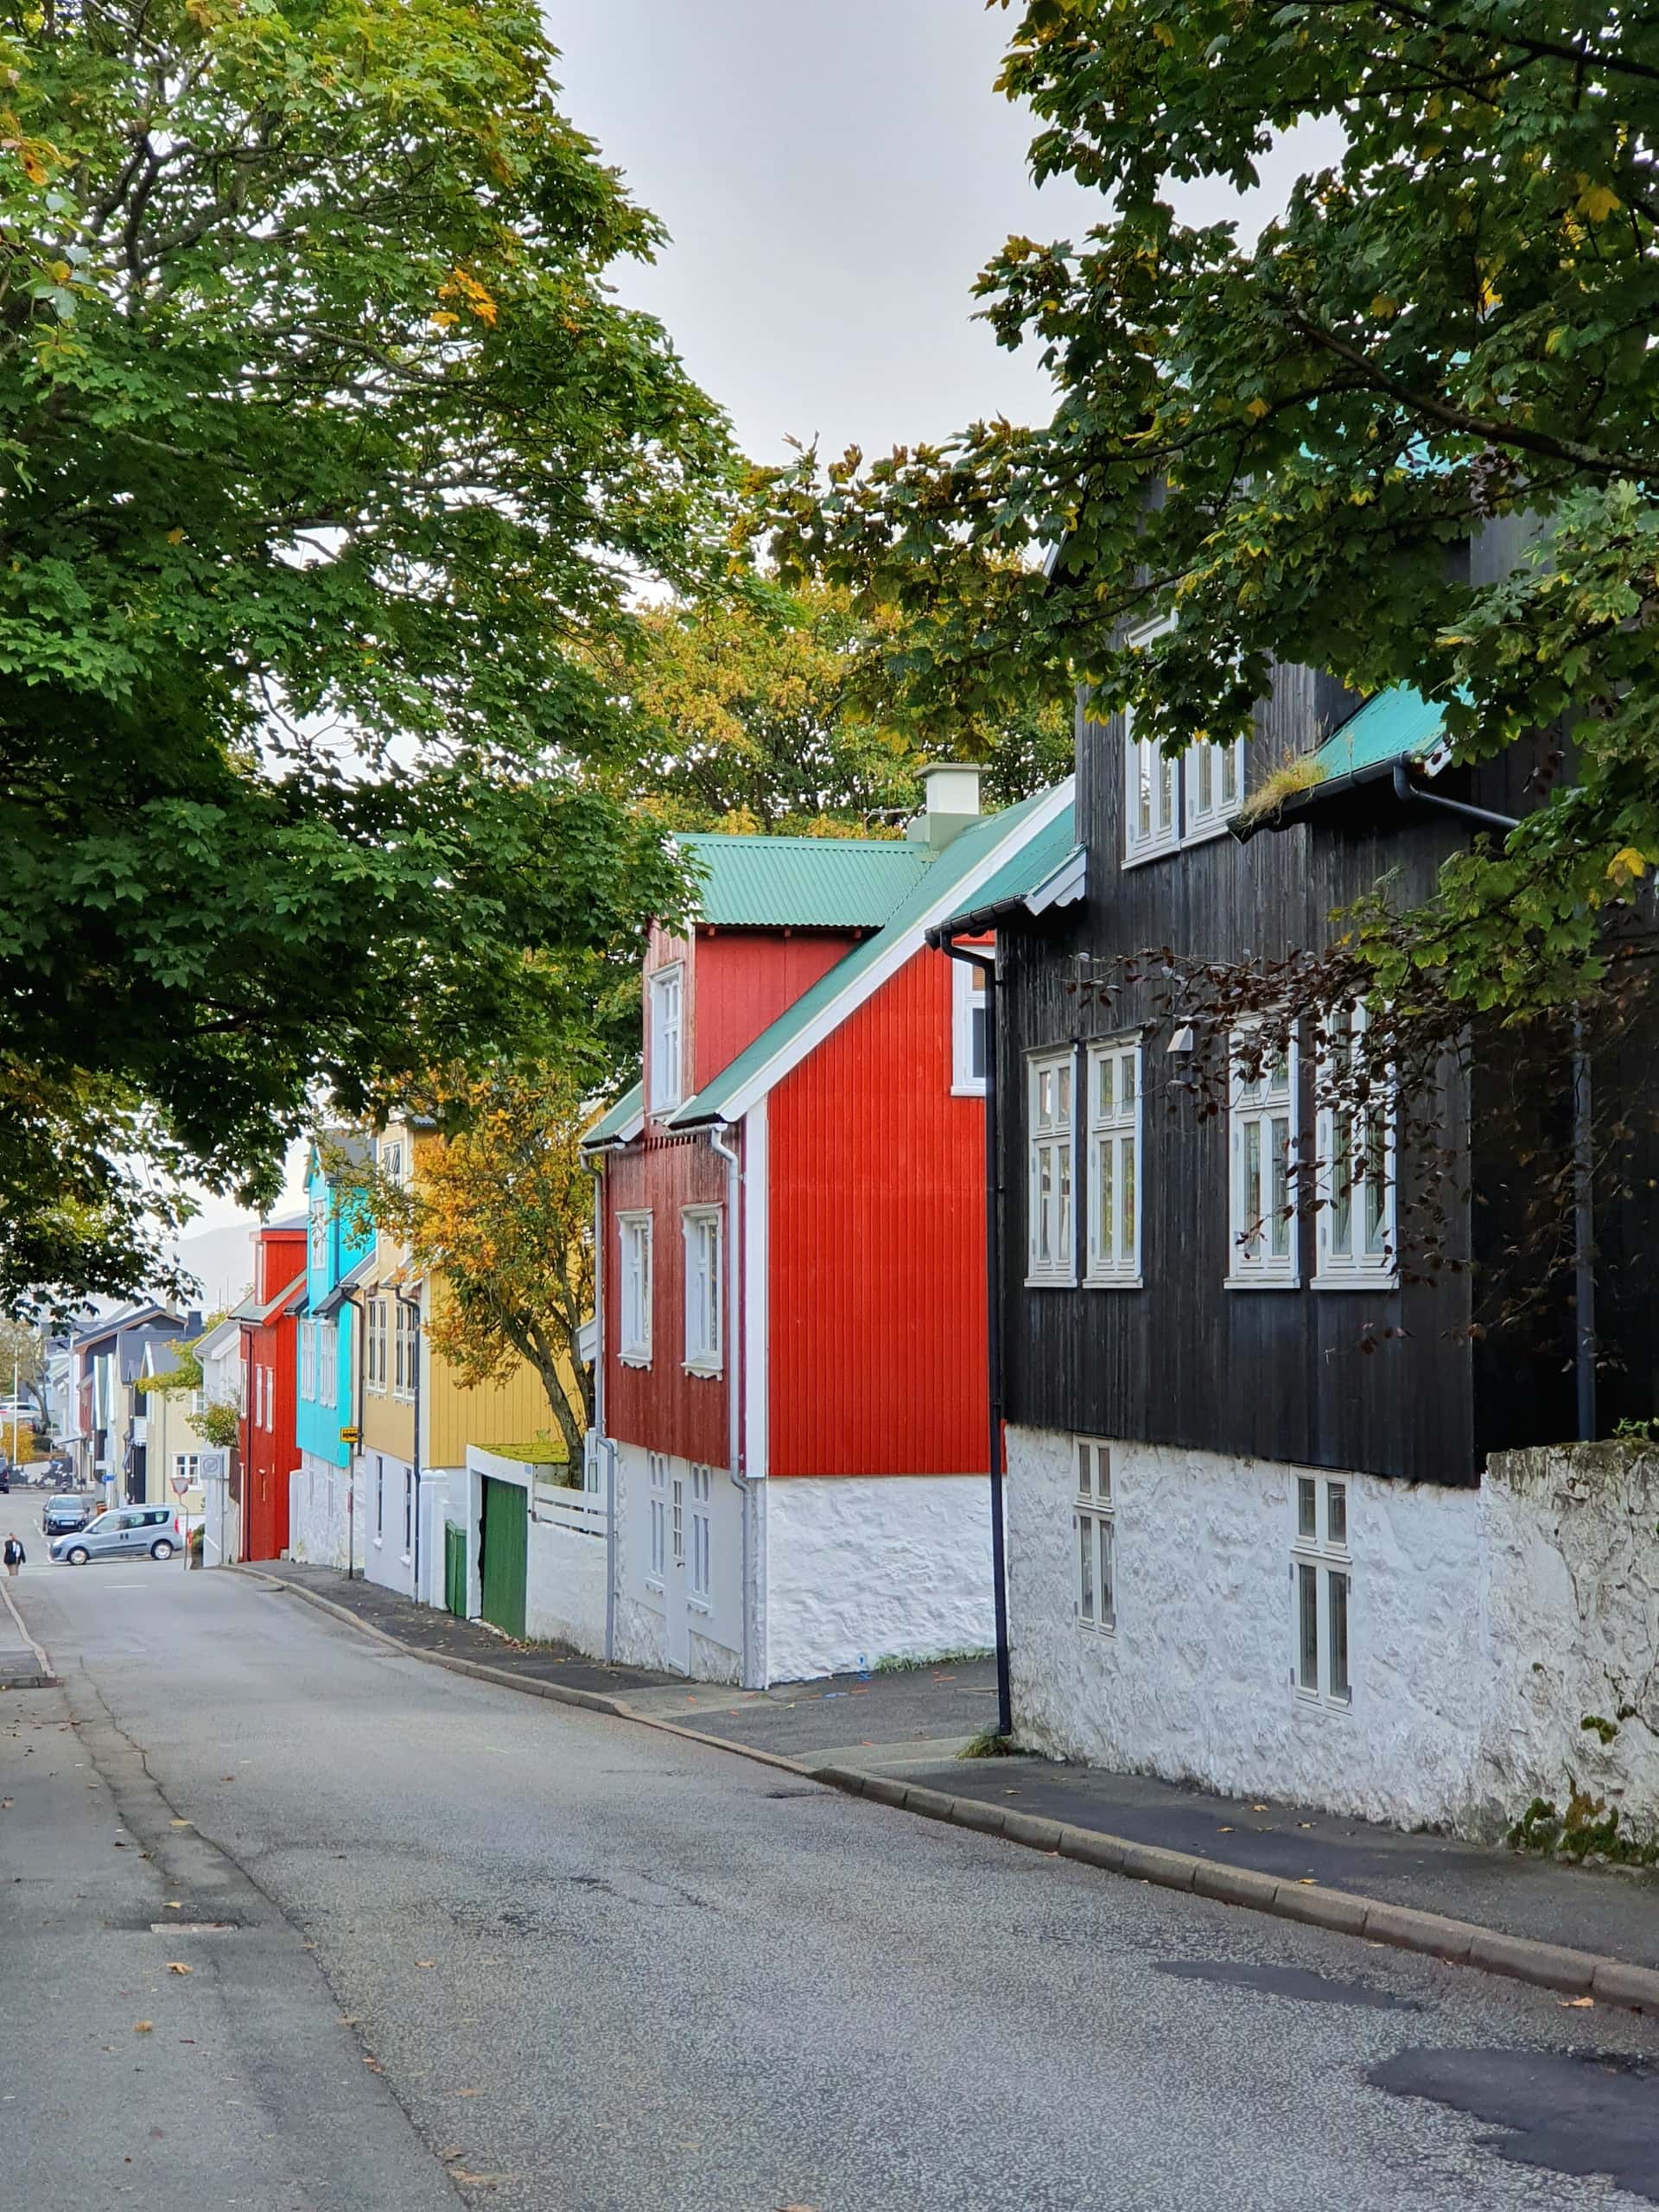 A view of the city centre of Tórshavn, the capital of the Faroe Islands